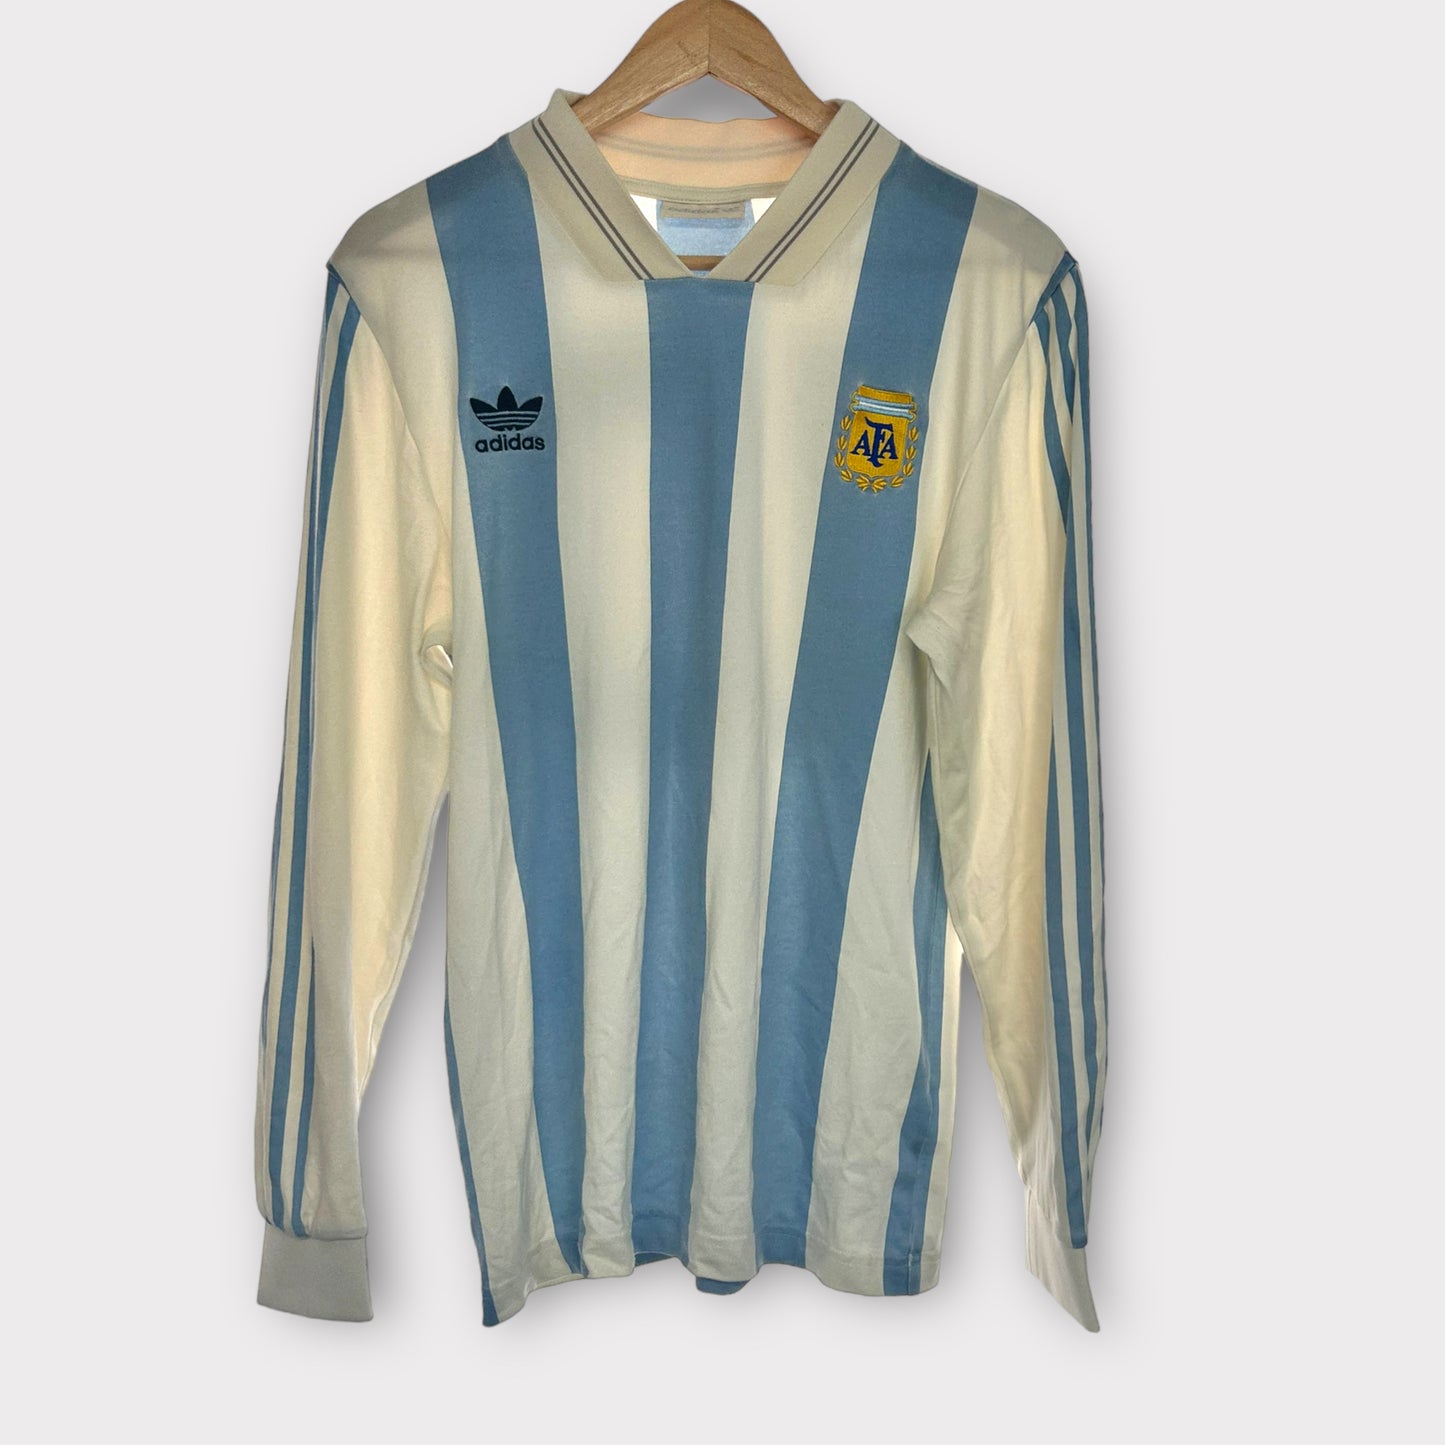 Argentina 1992/93 Adidas Re-Issue - #10 (Small)